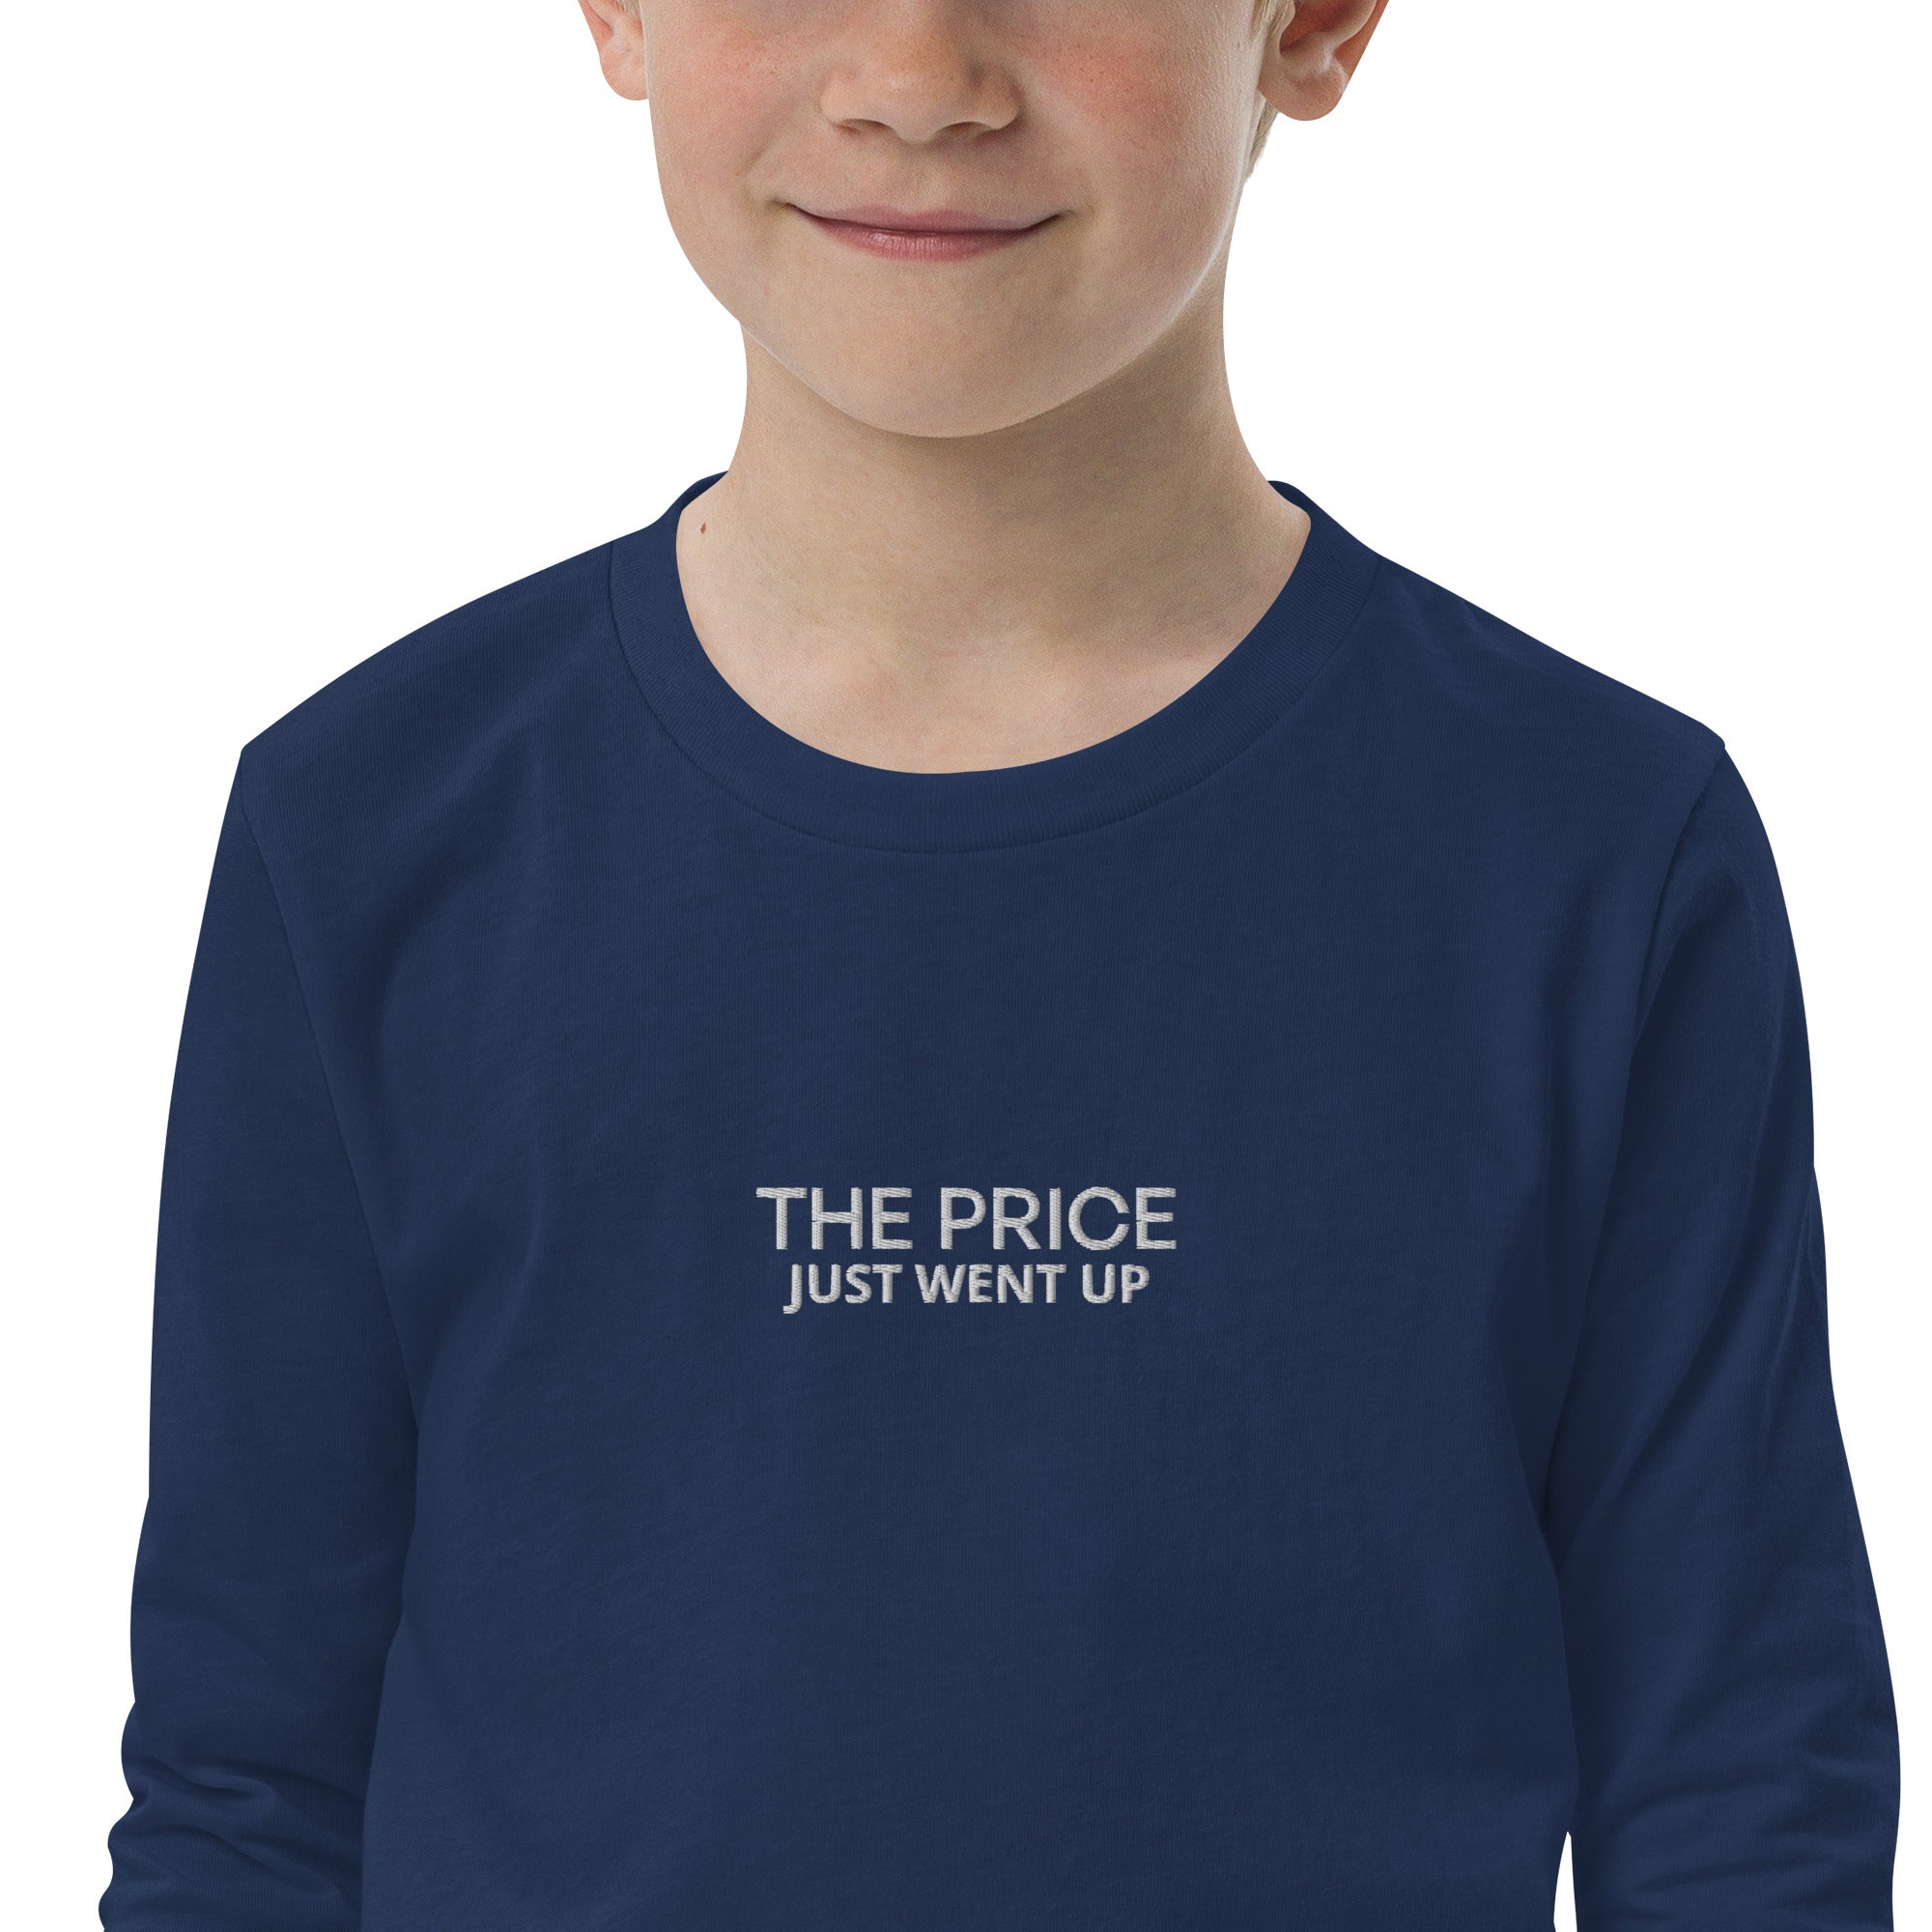 Unisex Youth "The Price Just Went Up" Stitched Long Sleeve Tee - THE CORNBREAD KITCHEN SHOP